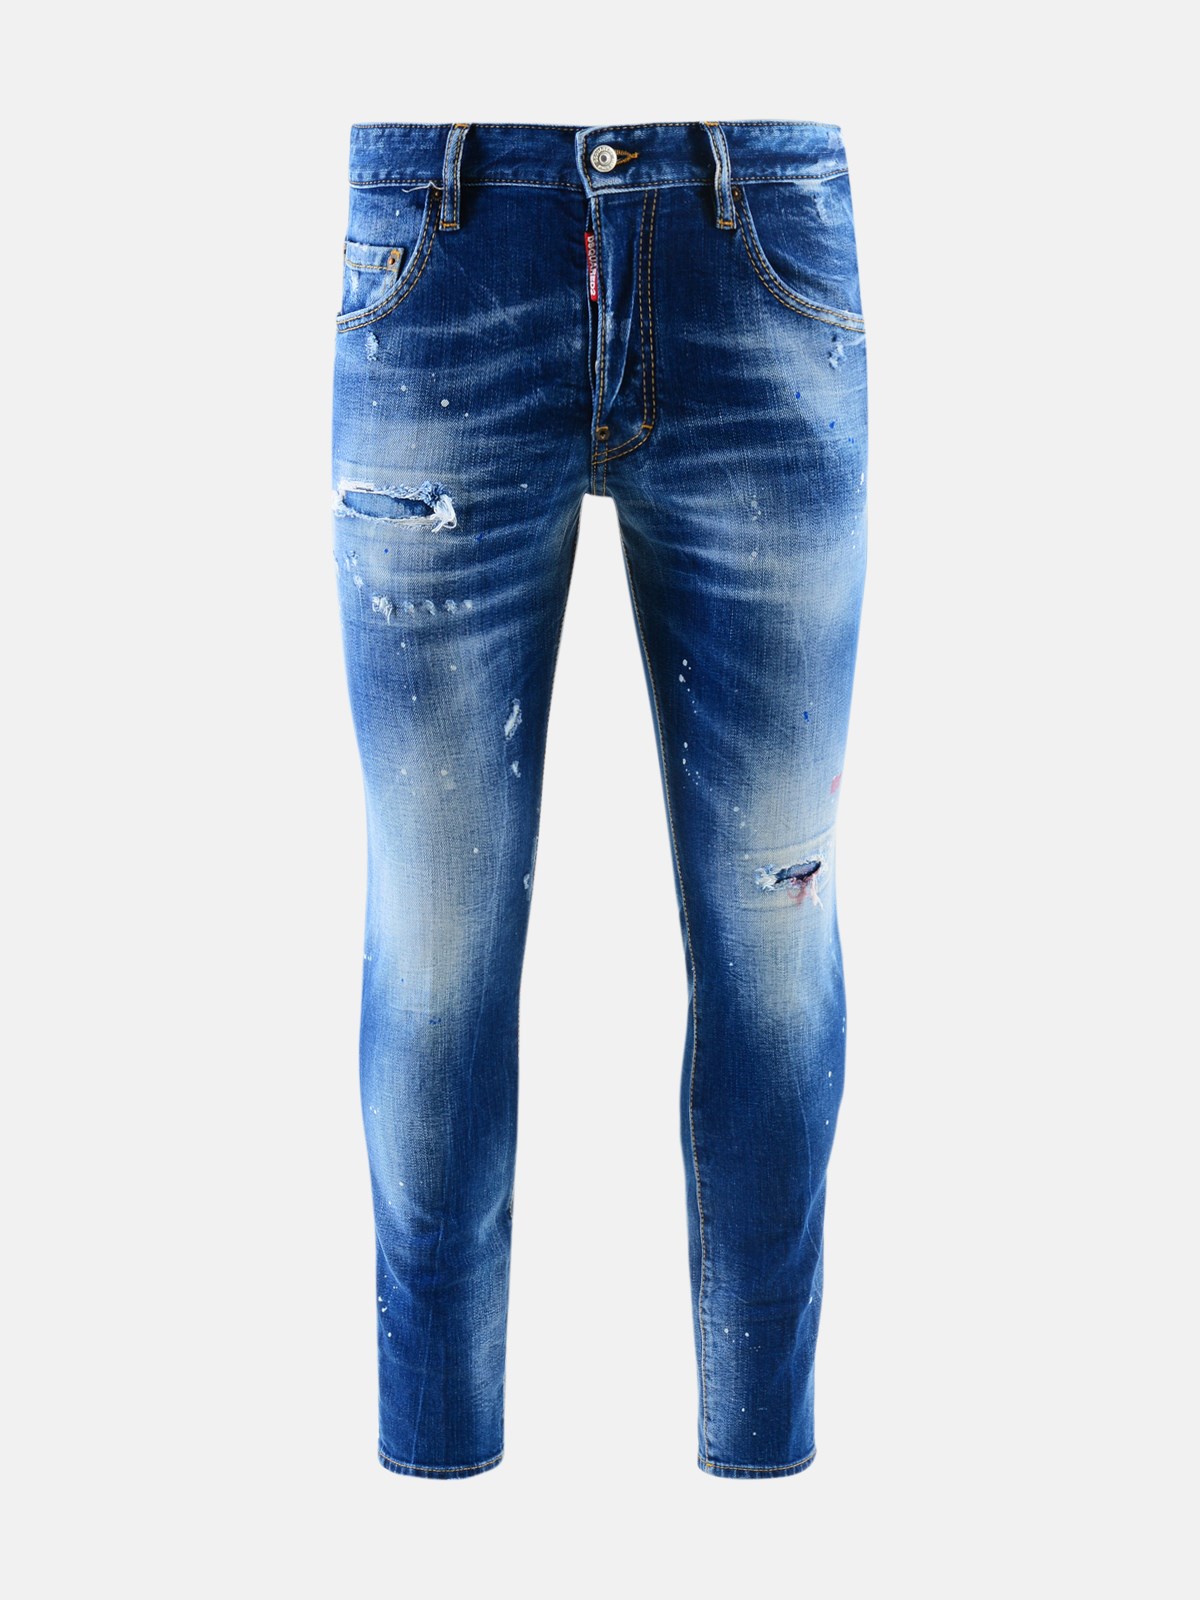 DSQUARED2 BLUE RIPPED SKATER JEANS